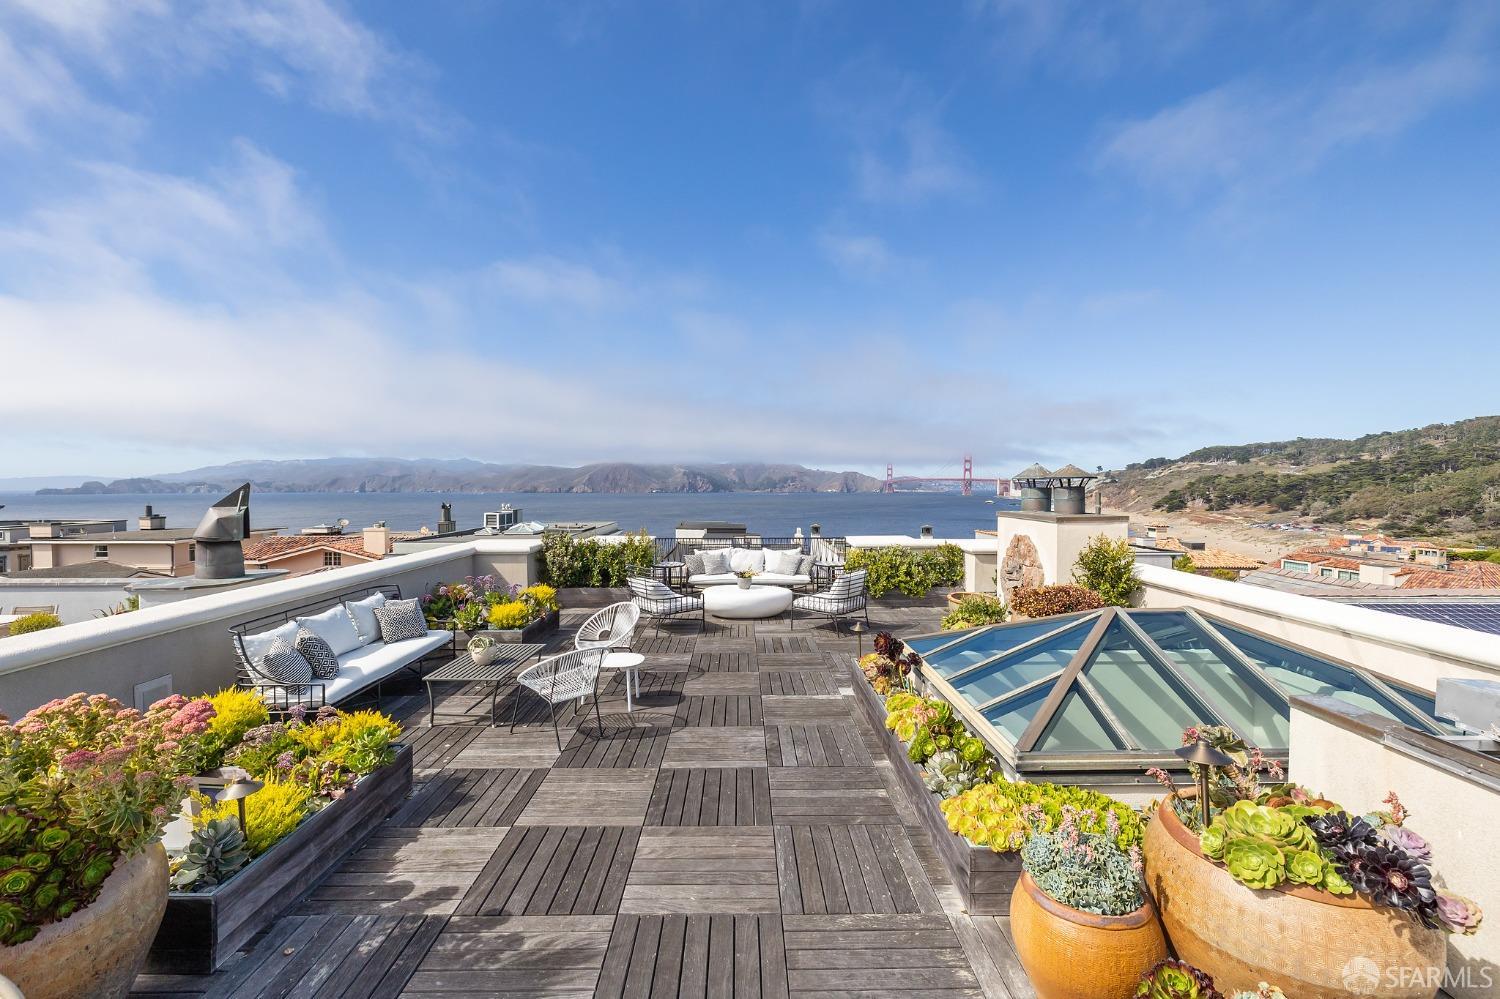 Listen to the sound of the ocean and gaze at the Golden Gate Bridge as you fall asleep each night. Near beaches, The Presidio and trails, 125 Sea Cliff Avenue is situated in one of the most sought-after locations in San Francisco's idyllic Sea Cliff neighborhood. Creating wonderful privacy, this remarkable home sits above and back from the street offering incredible views of San Francisco's iconic Golden Gate Bridge, the Marin Headlands, Pacific Ocean, The Presidio & beyond. Spanning three levels, it offers over 4500sf of living space, 4 Bedrooms, 3.5 baths, a lower level media/game room & guest quarters. The main level features a high-end kitchen with breakfast bar that opens to the den, large formal liivng room with gas fireplace and formal dining area.  Wonderful outdoor areas include a charming garden off the family room, plus a retractable skylight that opens to the enormous roof deck with panoramic views. Situated off the rear alley is a 2-car garage.  Truly an amazing location and opportunity!  Full Video and addl info at 125seacliff.com